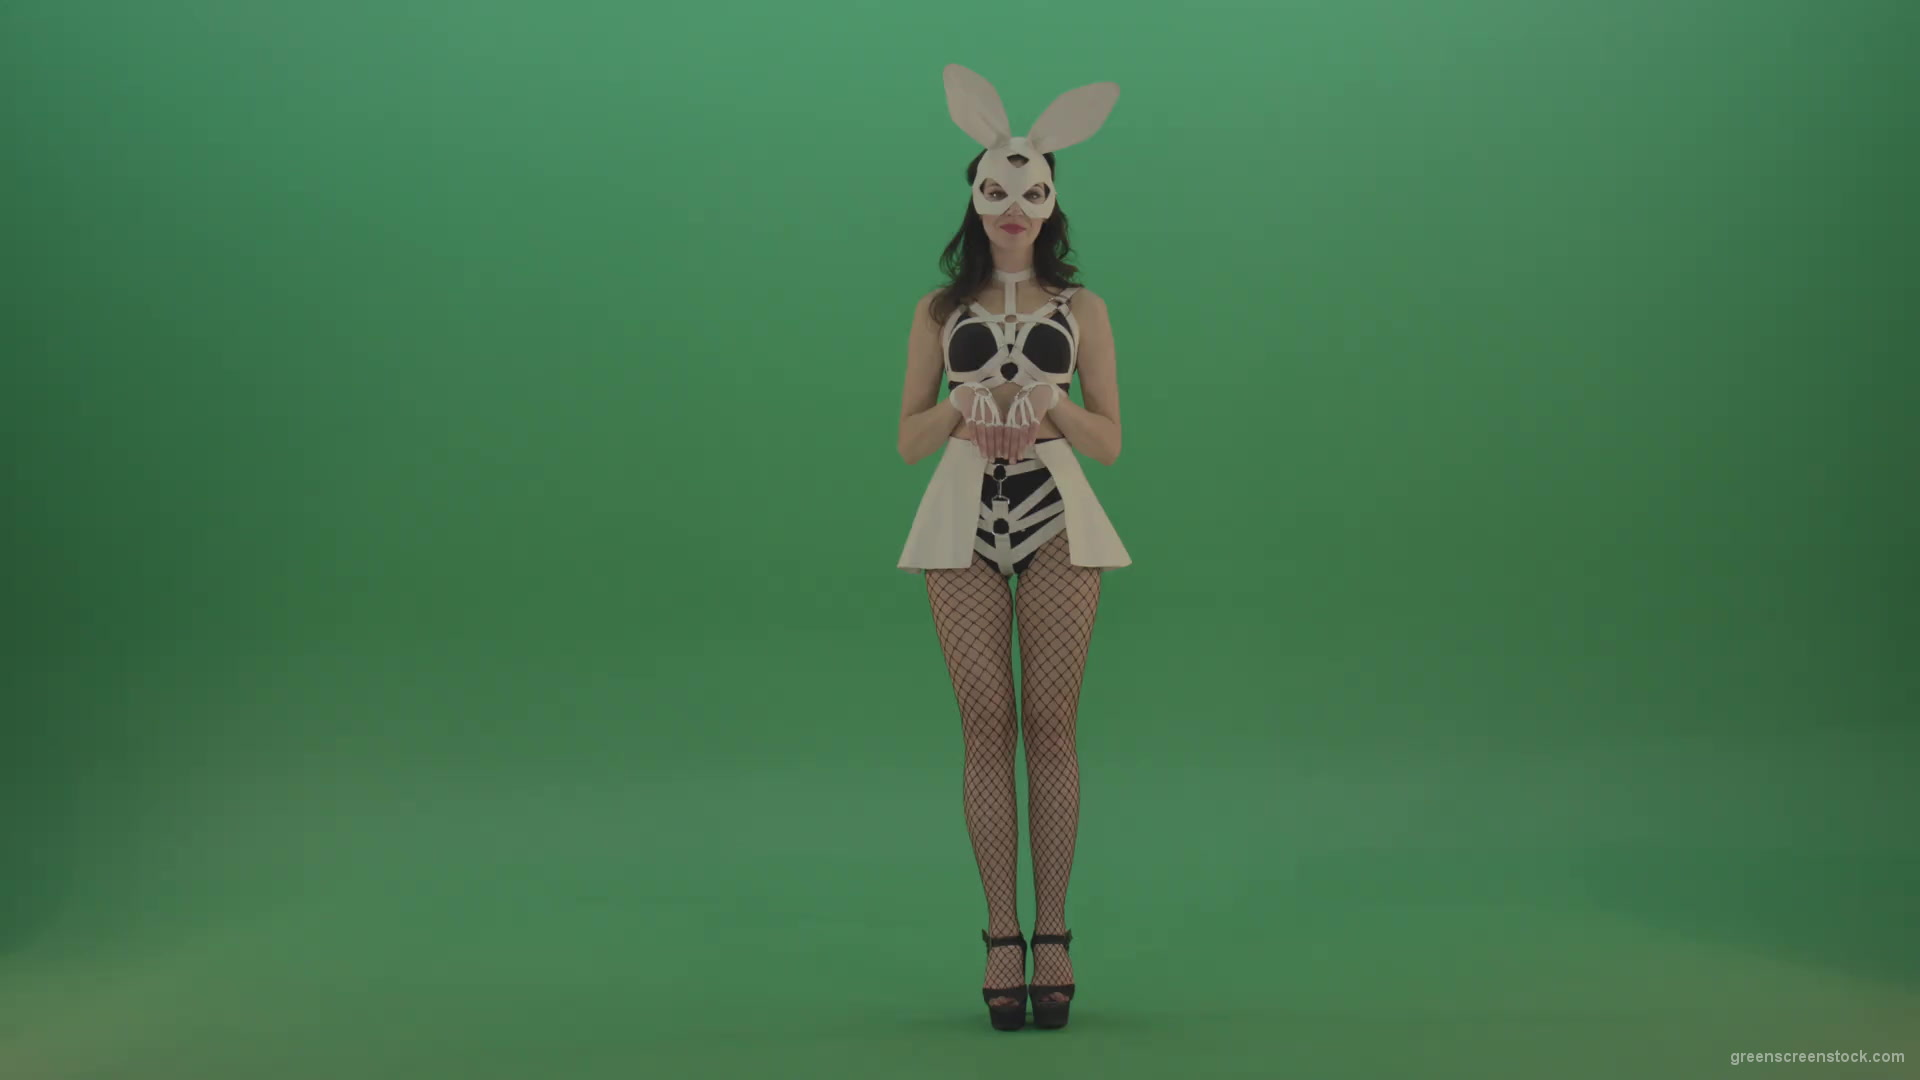 Happy-girl-dressed-in-rabbit-costume-for-adults-cyclically-jumping-in-different-directions-with-white-ears-on-chromakey-background-1920_001 Green Screen Stock